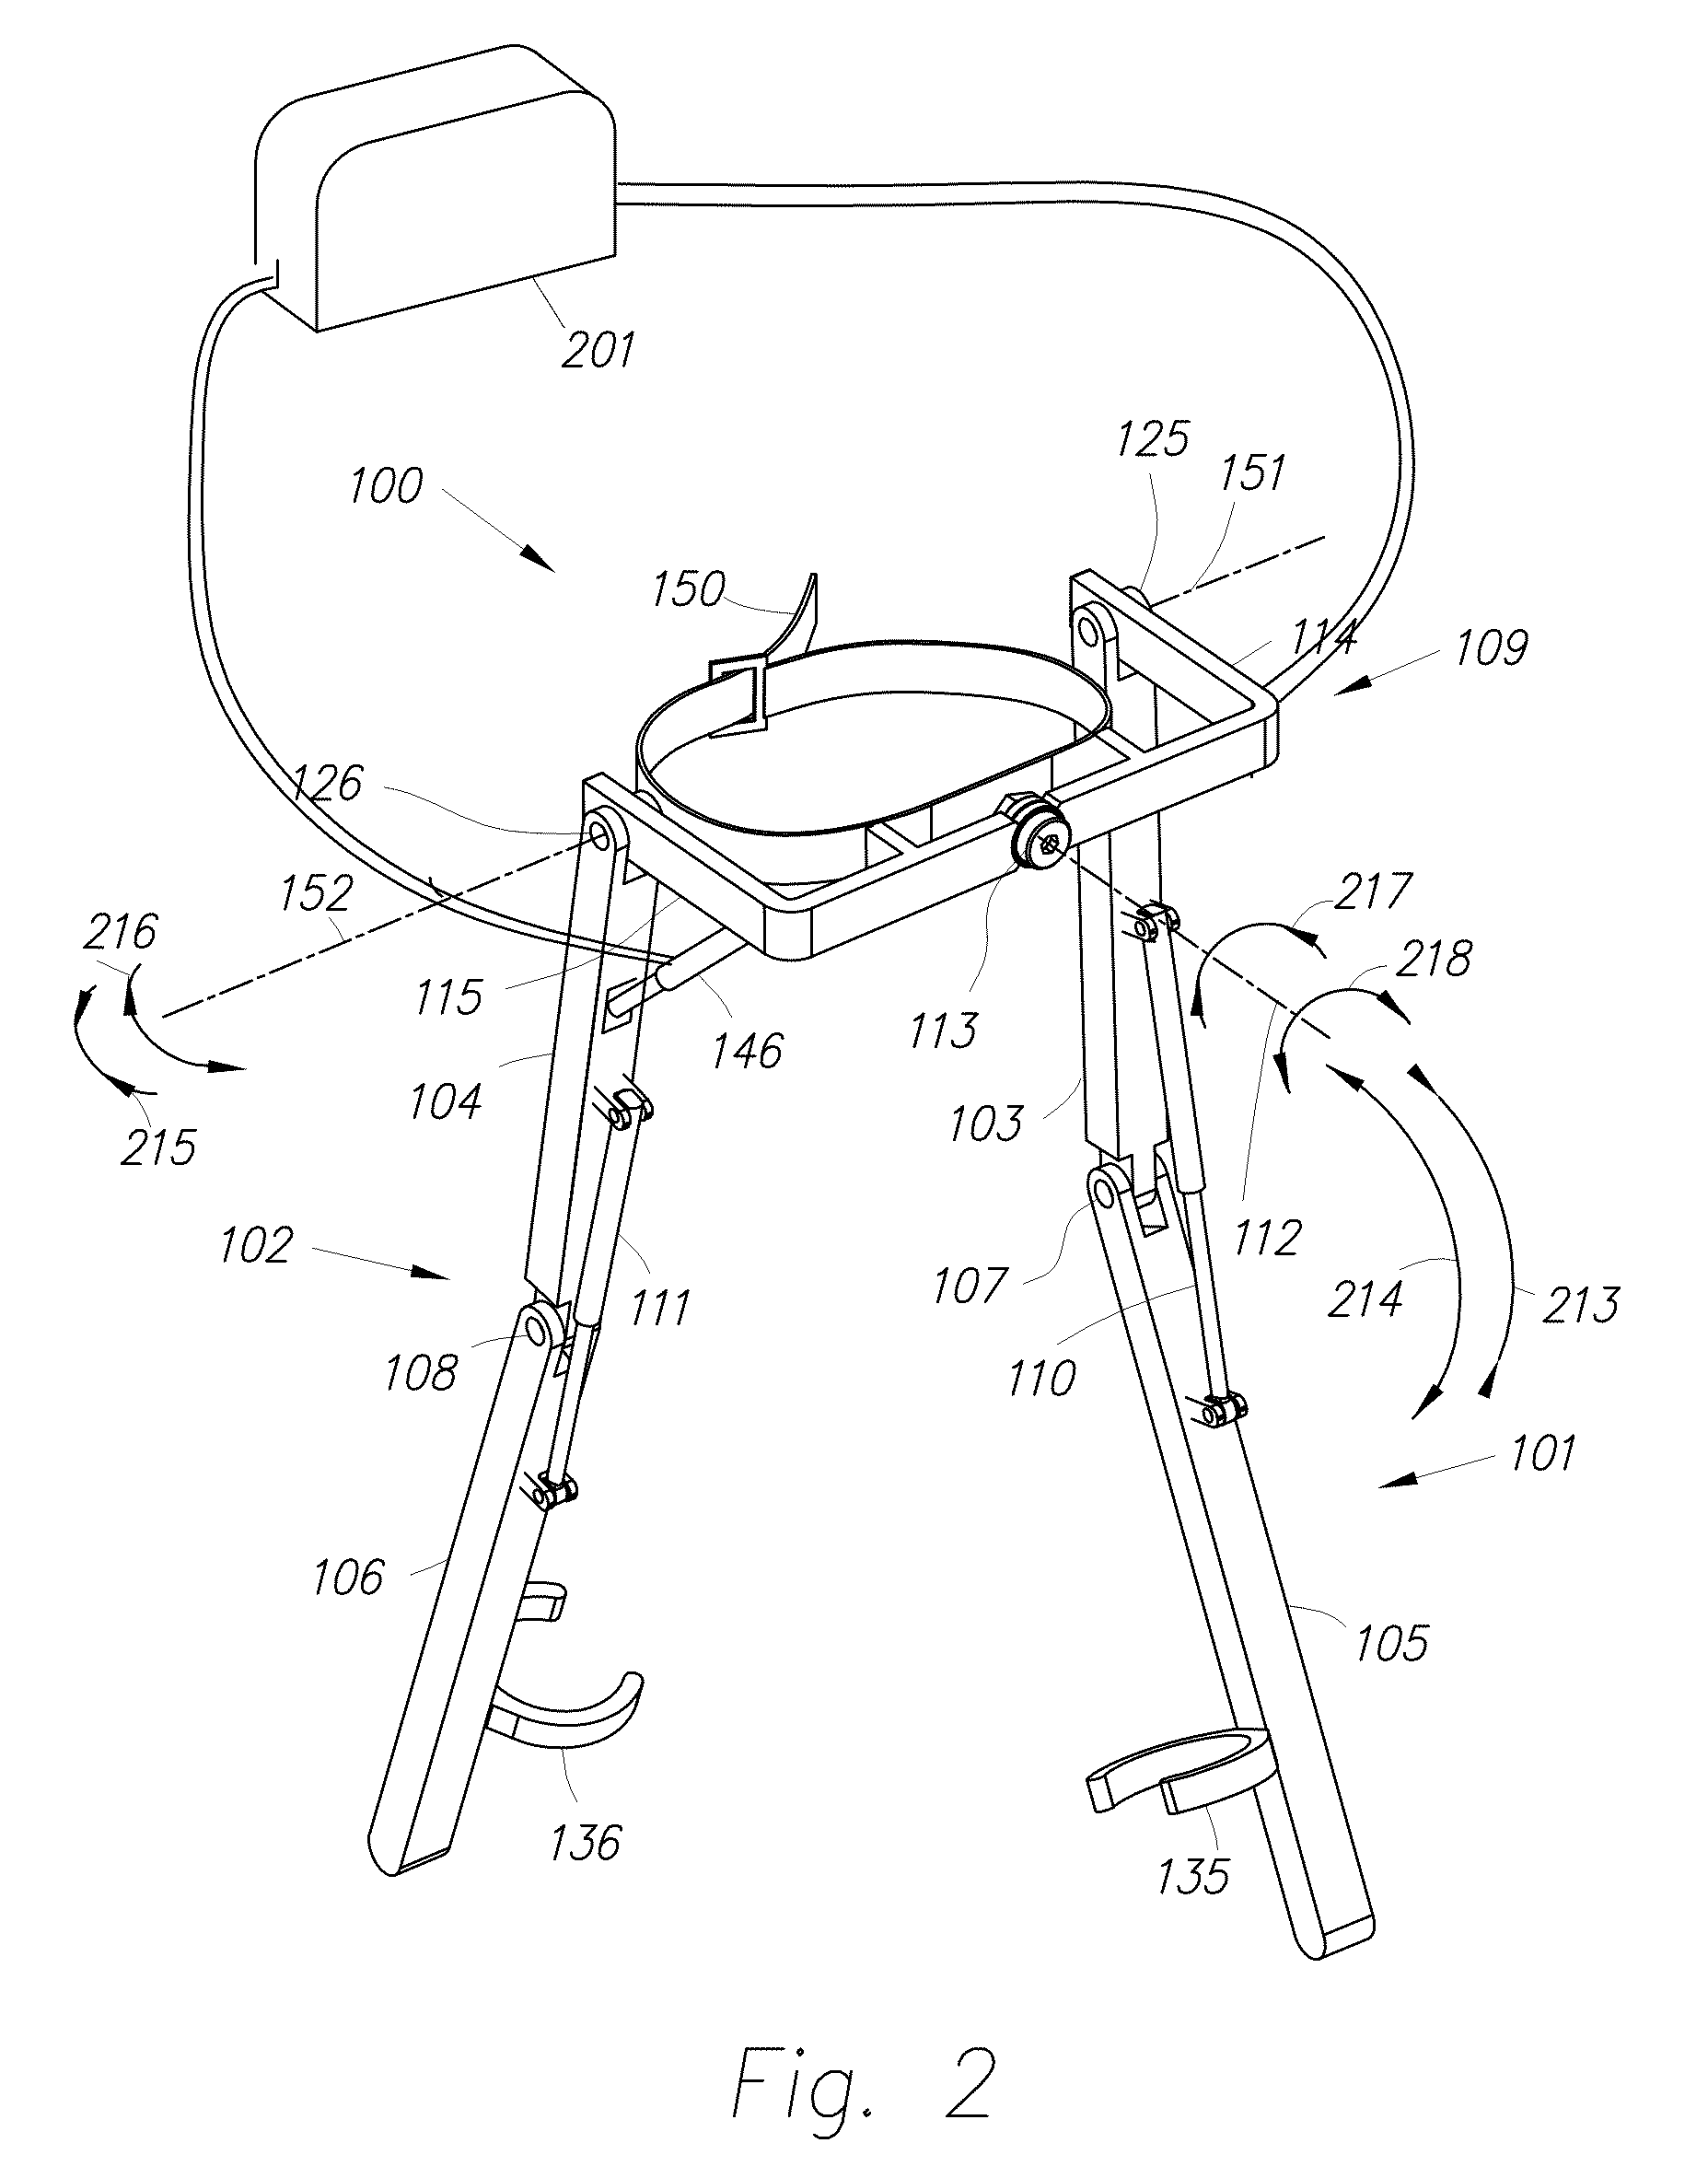 Device and Method for Decreasing Oxygen Consumption of a Person During Steady Walking by Use of a Load-Carrying Exoskeleton